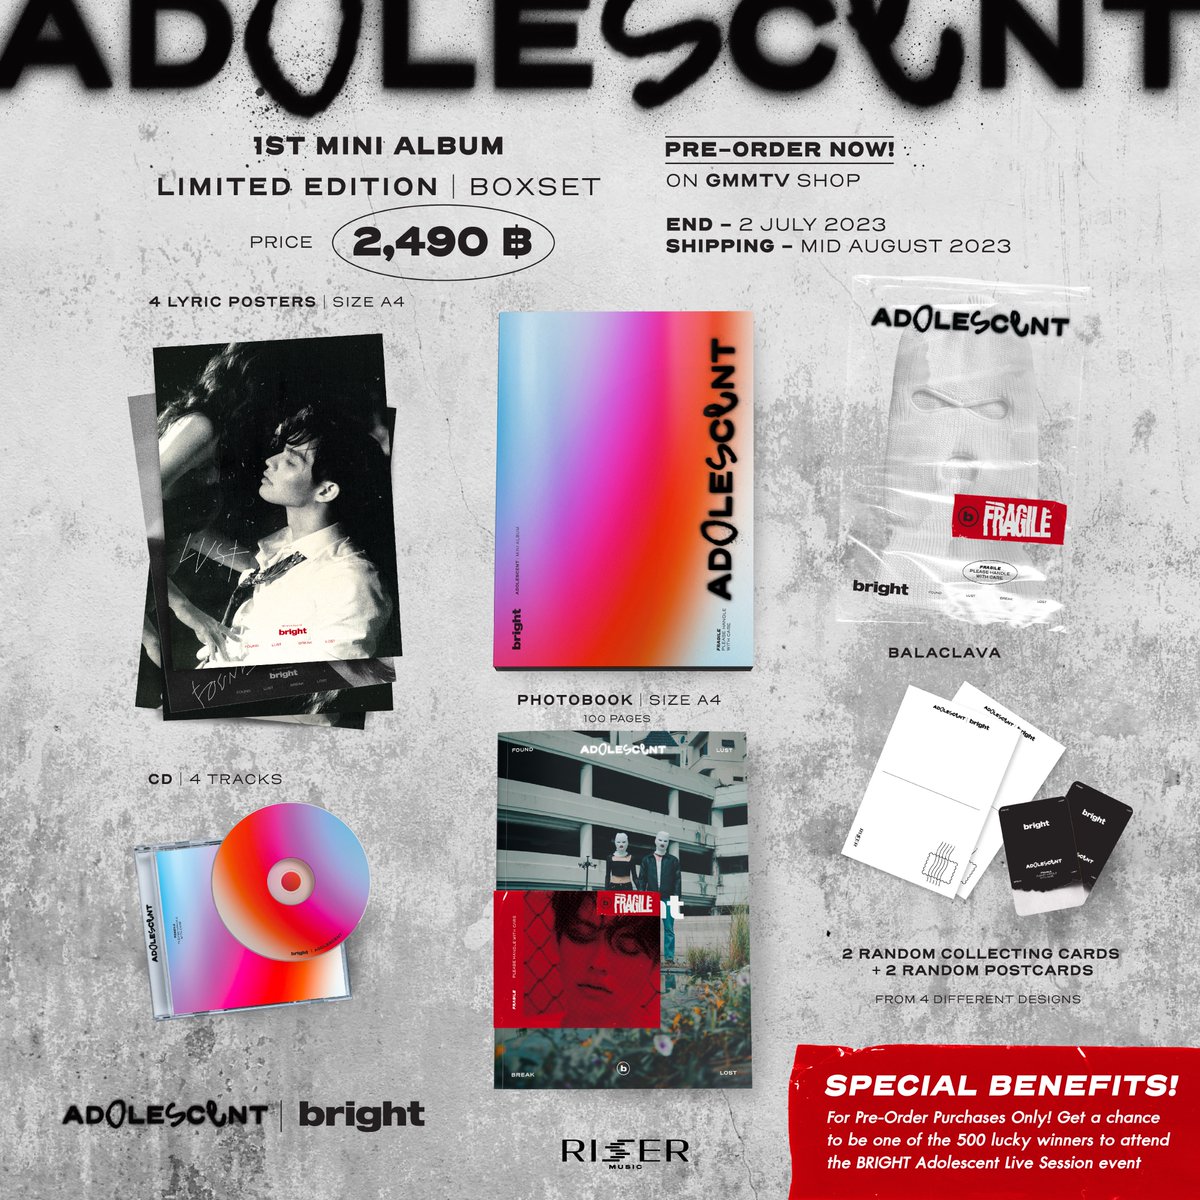 ADOLESCENT 1ST MINI ALBUM LIMITED EDITION BOXSET

PRE-ORDER ON GMMTV SHOP
gmm-tv.com/shop/adolescen…

Pre-order opens now until July 2, 2023.
All purchase orders will be shipped sequentially starting from early August 2023.

#ADOLESCENTMINIALBUM
#bbrightvc
#RISERMUSIC